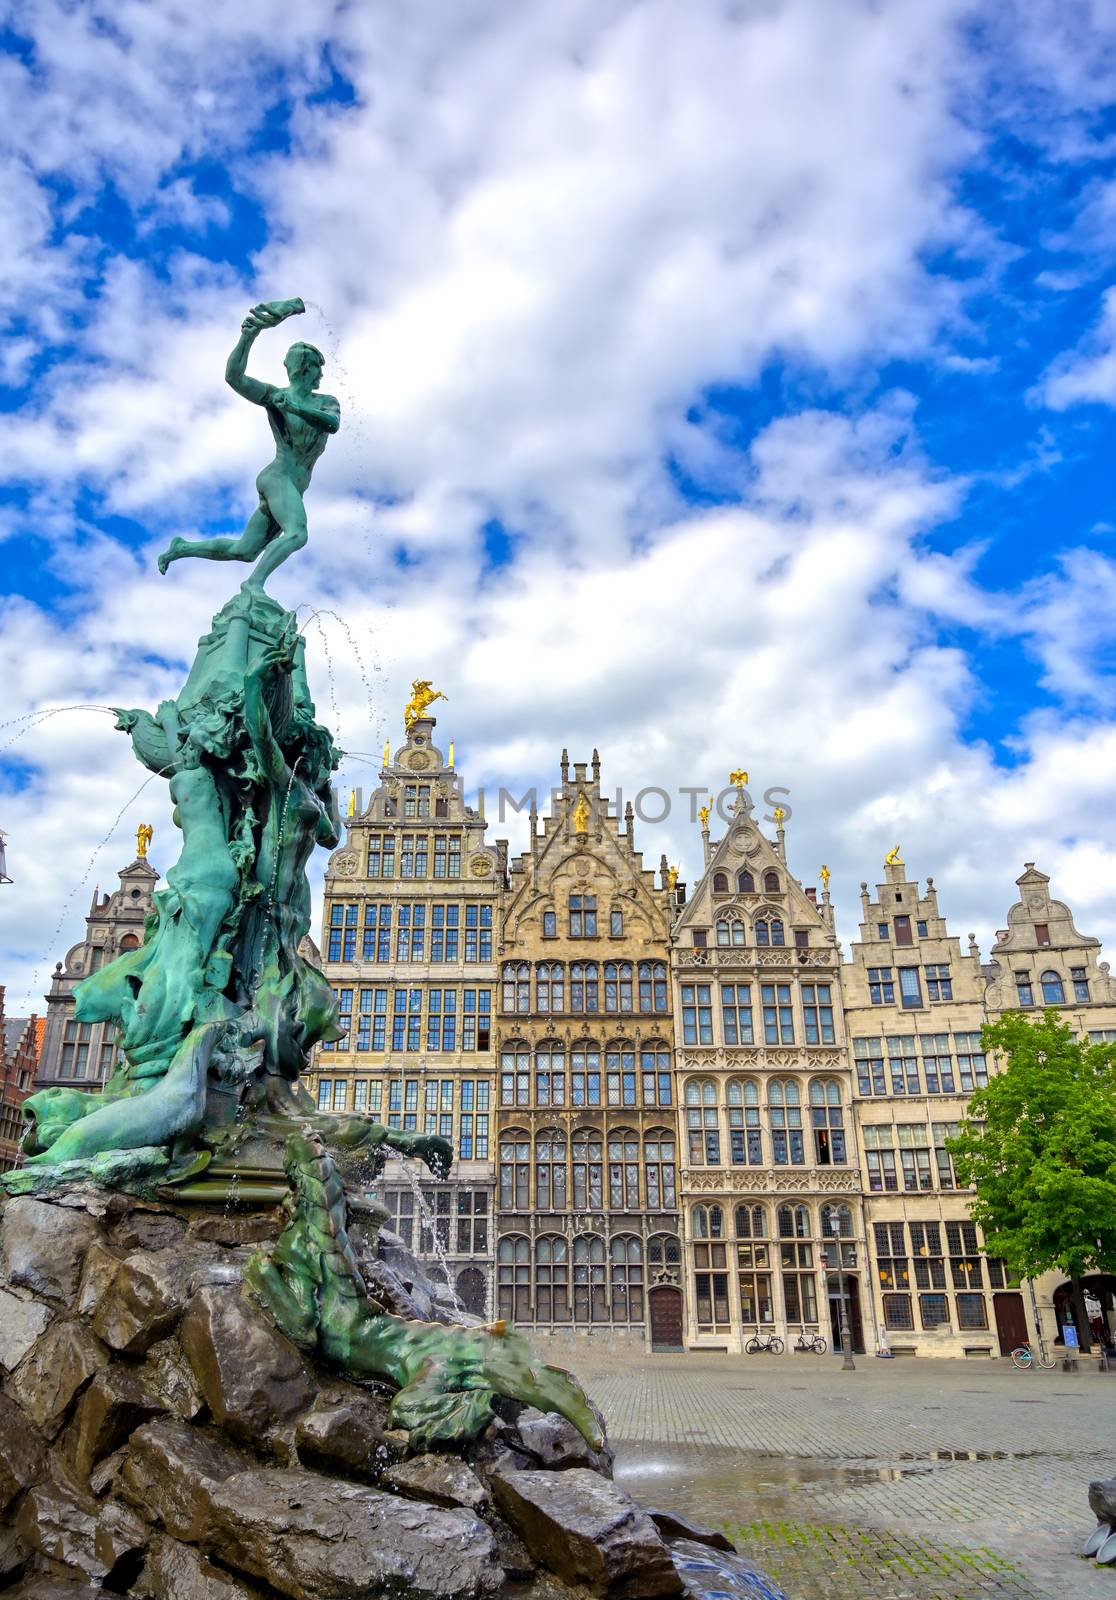 The Brabo Fountain located in the Grote Markt (Main Square) of Antwerp (Antwerpen), Belgium.